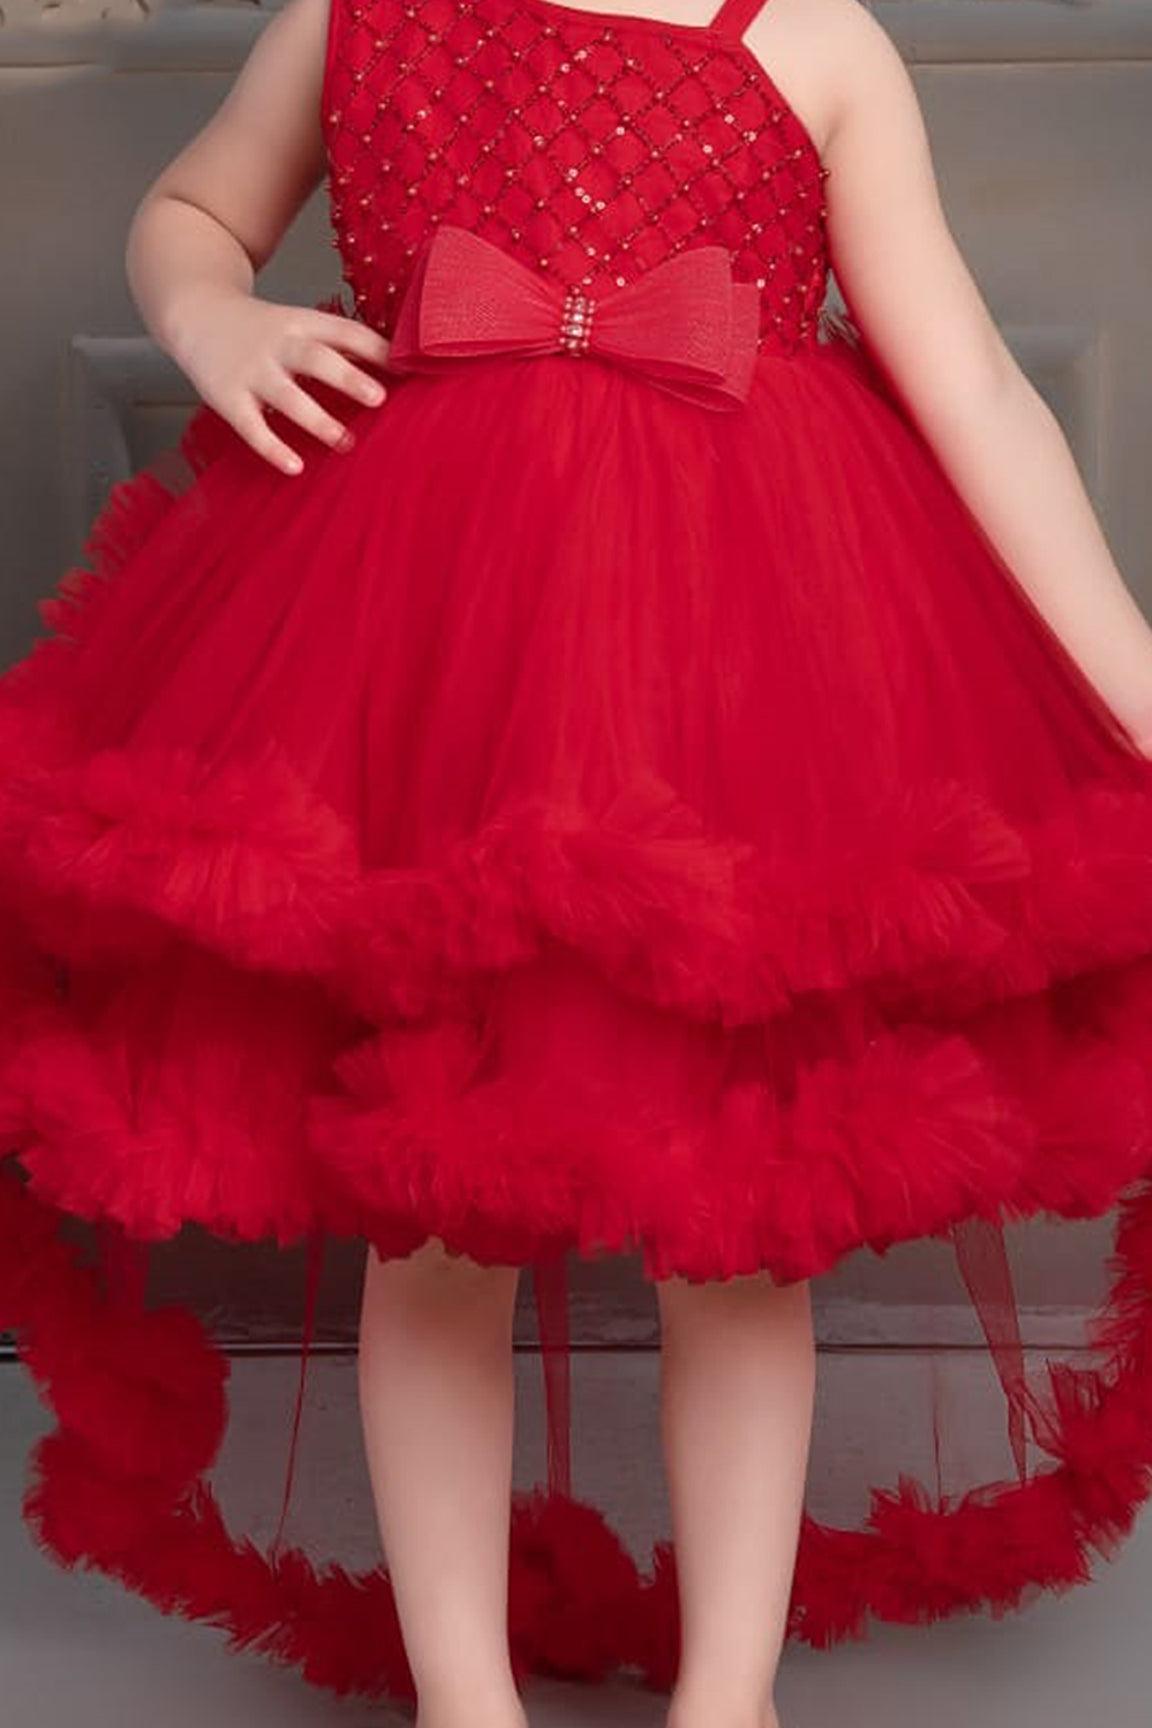 Red Tailback Frock With Bow For Girls - Lagorii Kids